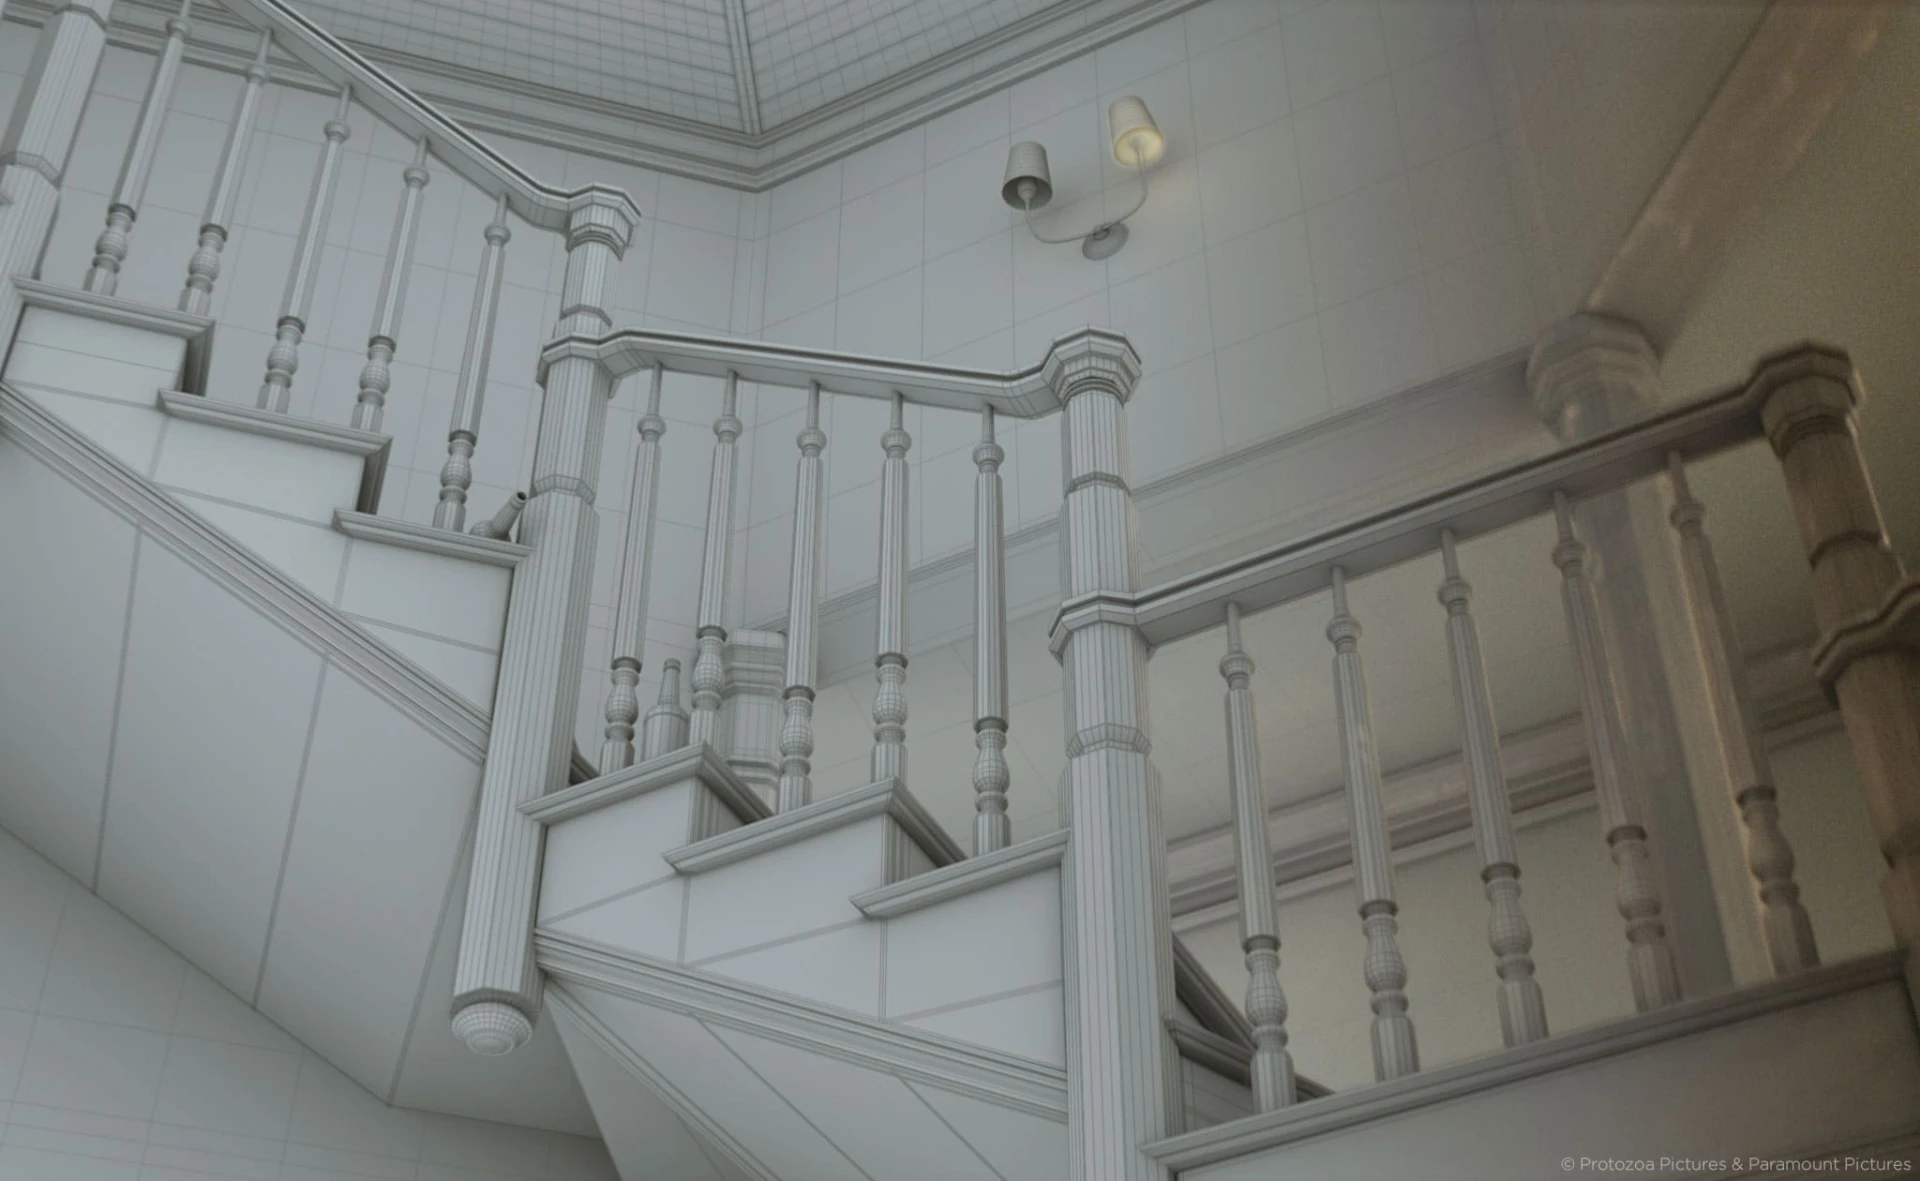 Mother! shot of the layer drawning of the staircase before from Raynault vfx